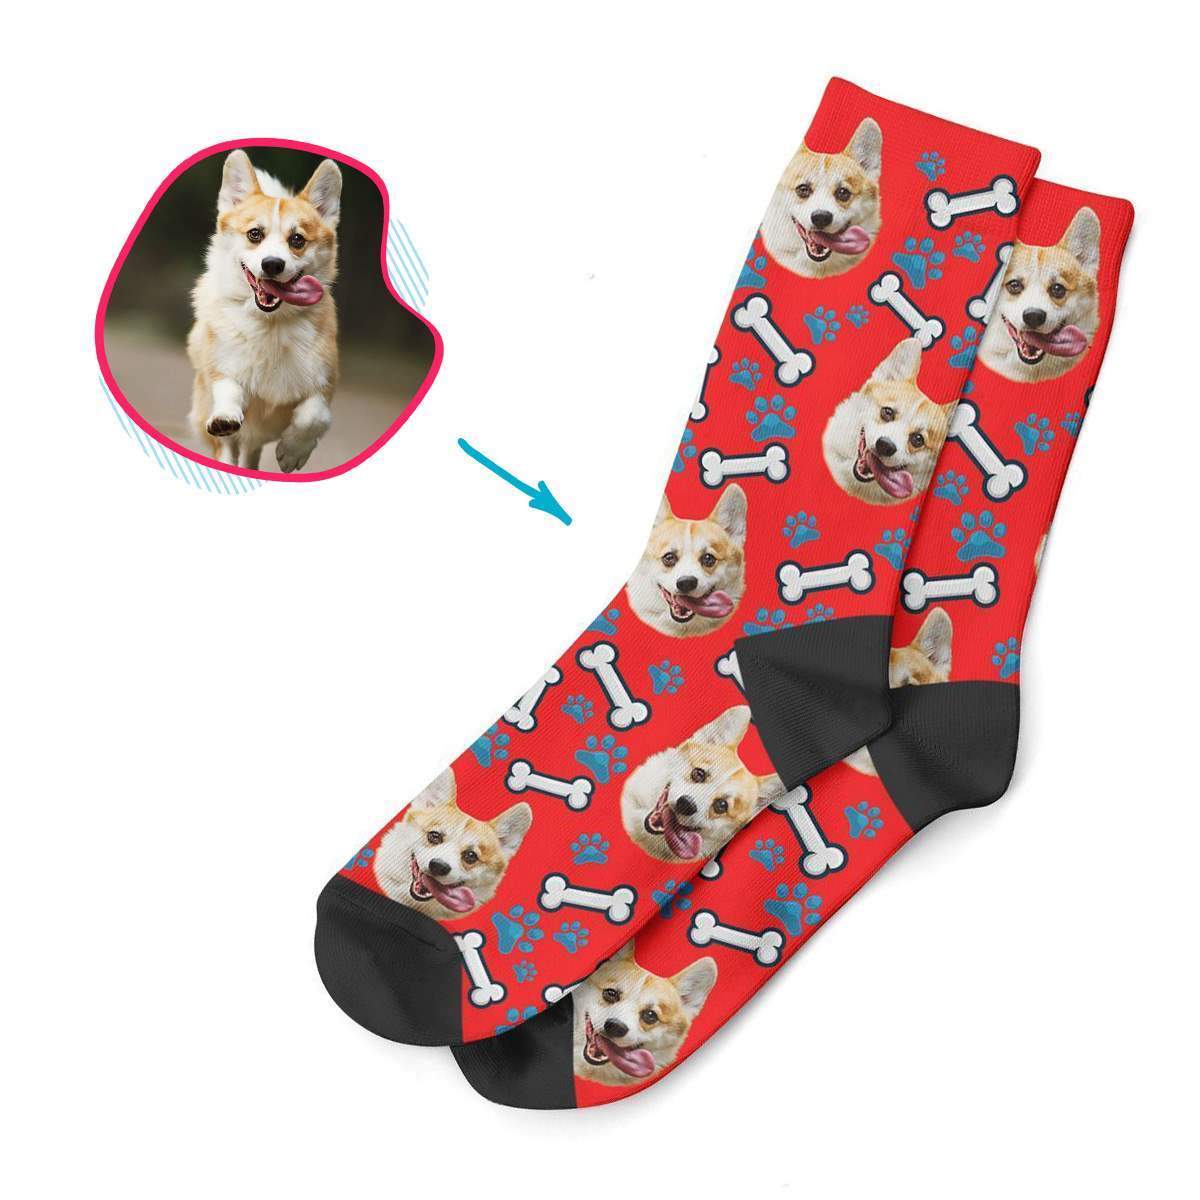 red Dog socks personalized with photo of face printed on them